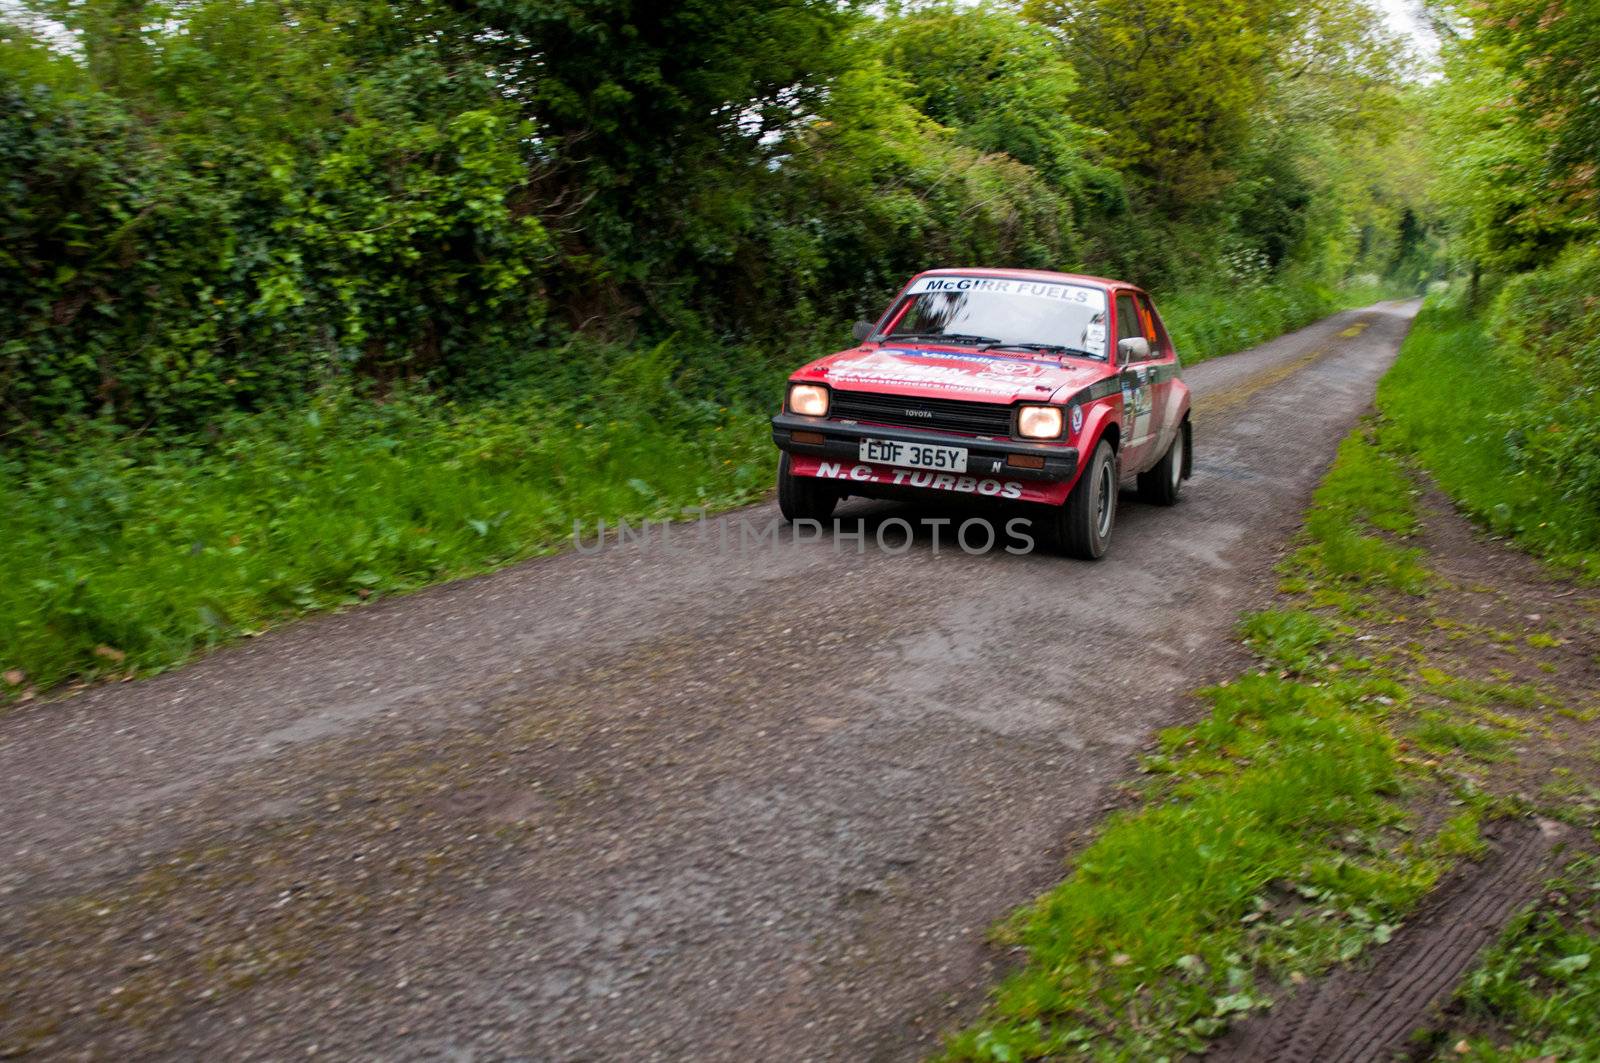 MALLOW, IRELAND - MAY 19: S. Mcgirr driving Toyota Starlet at the Jim Walsh Cork Forest Rally on May 19, 2012 in Mallow, Ireland. 4th round of the Valvoline National Forest Rally Championship.